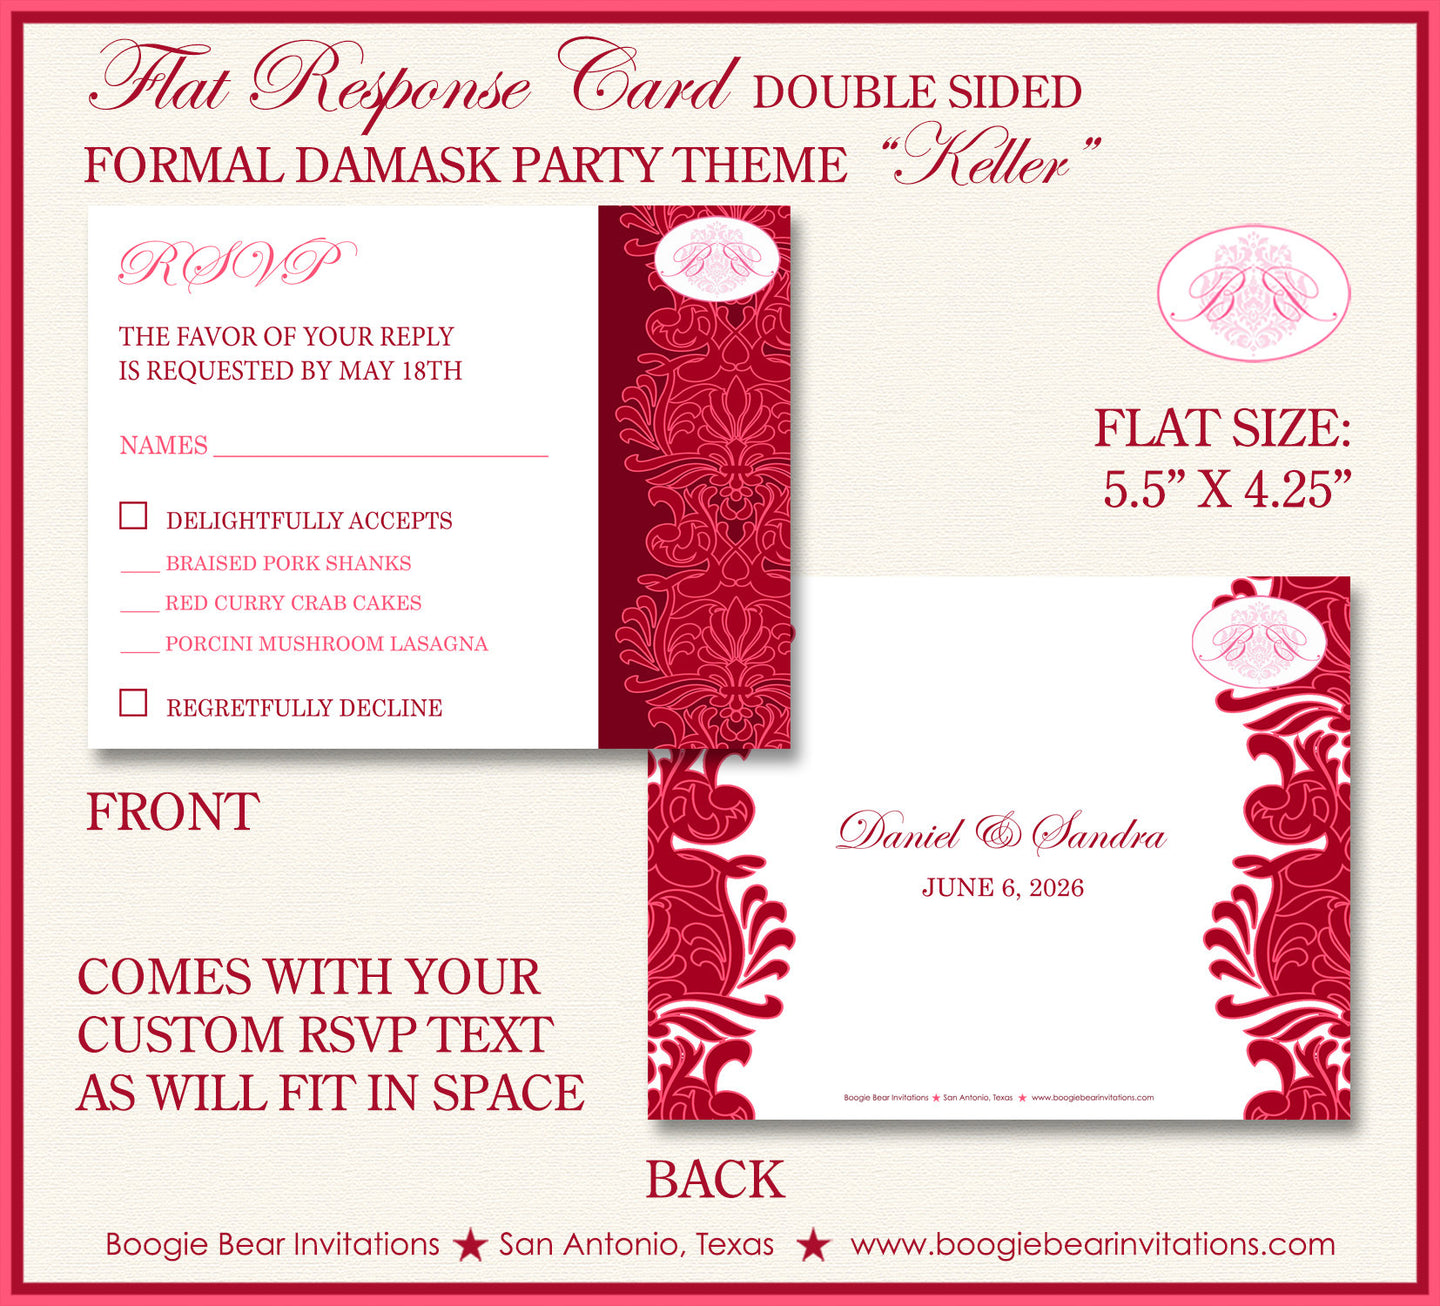 Formal Damask RSVP Card Birthday Party Response Reply Guest Red Flower Victorian Ball Elegant Boogie Bear Invitations Keller Theme Printed